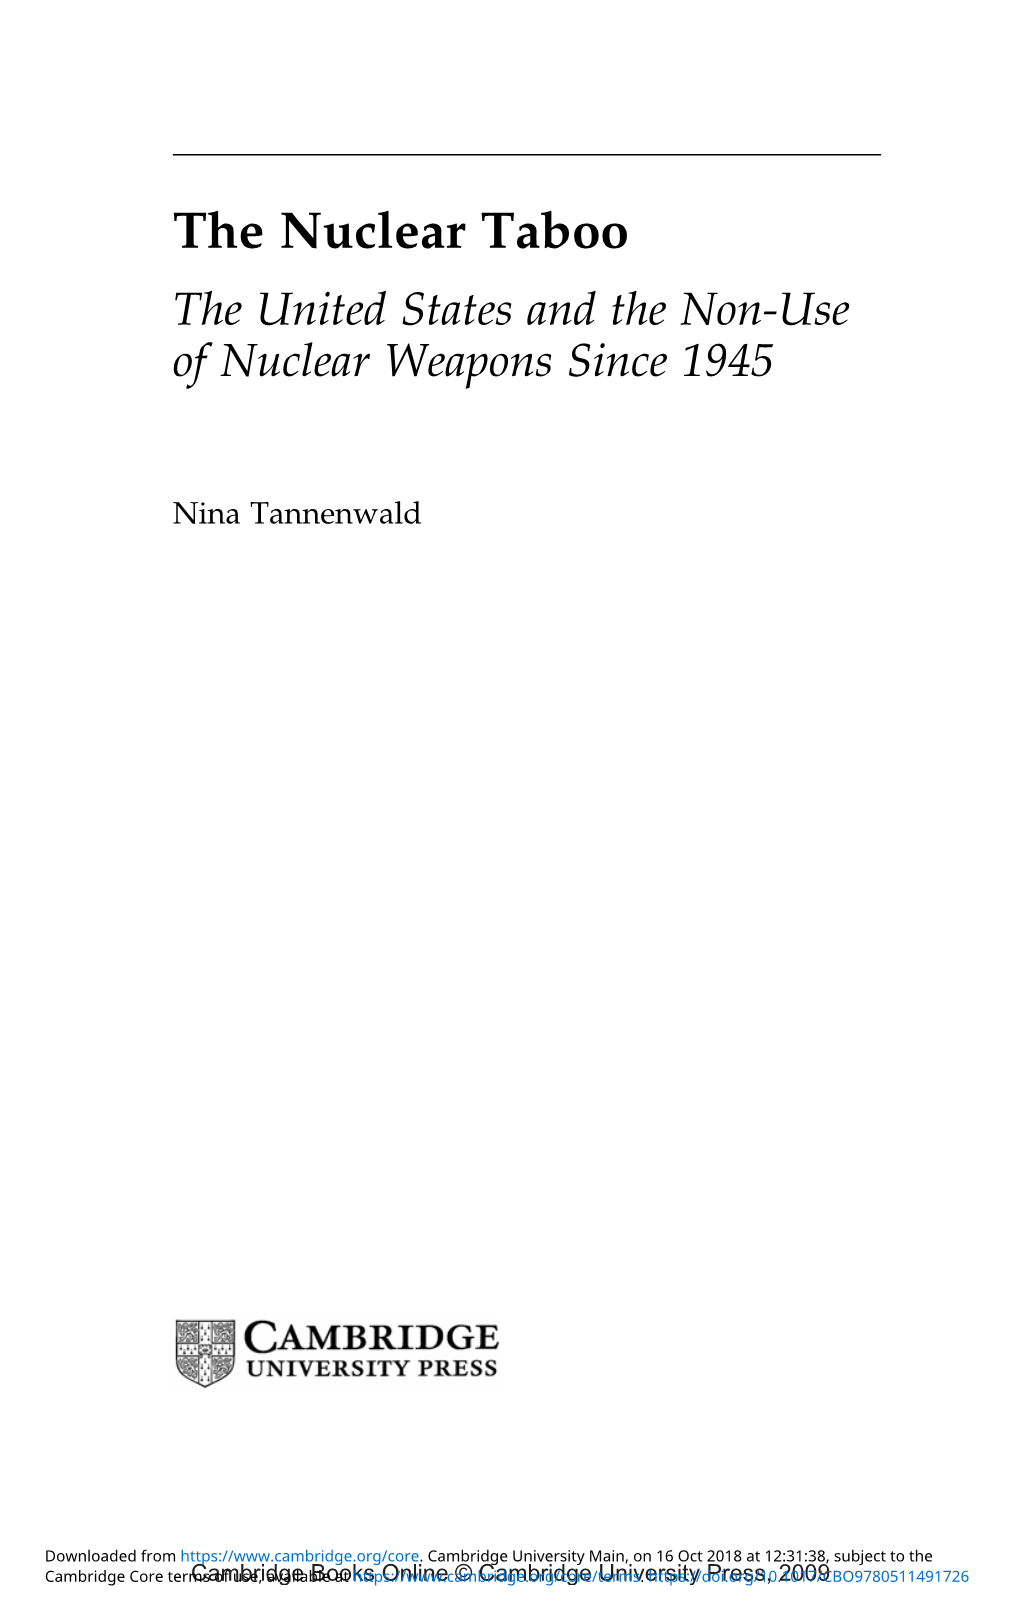 The Nuclear Taboo the United States and the Non-Use of Nuclear Weapons Since 1945